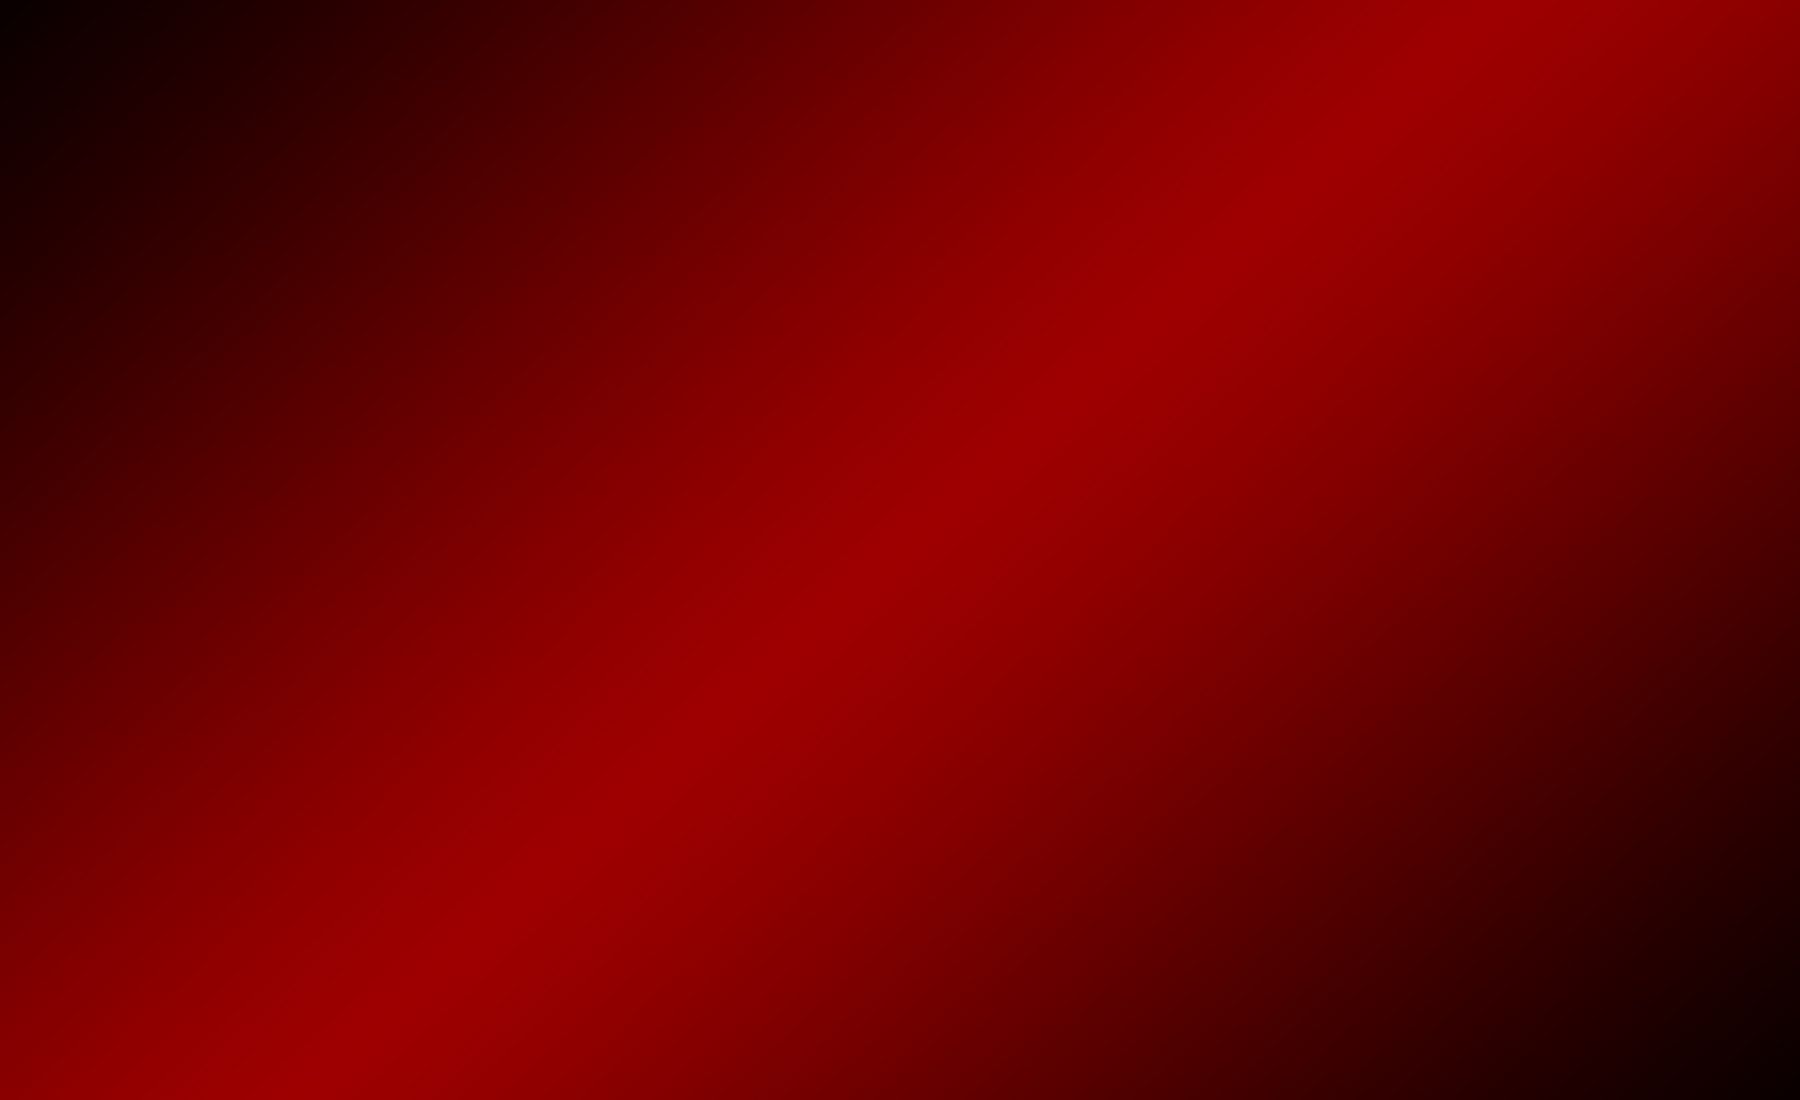 Orange Dark Red And Black Gradient Android Wallpapers - Wallpaper Cave